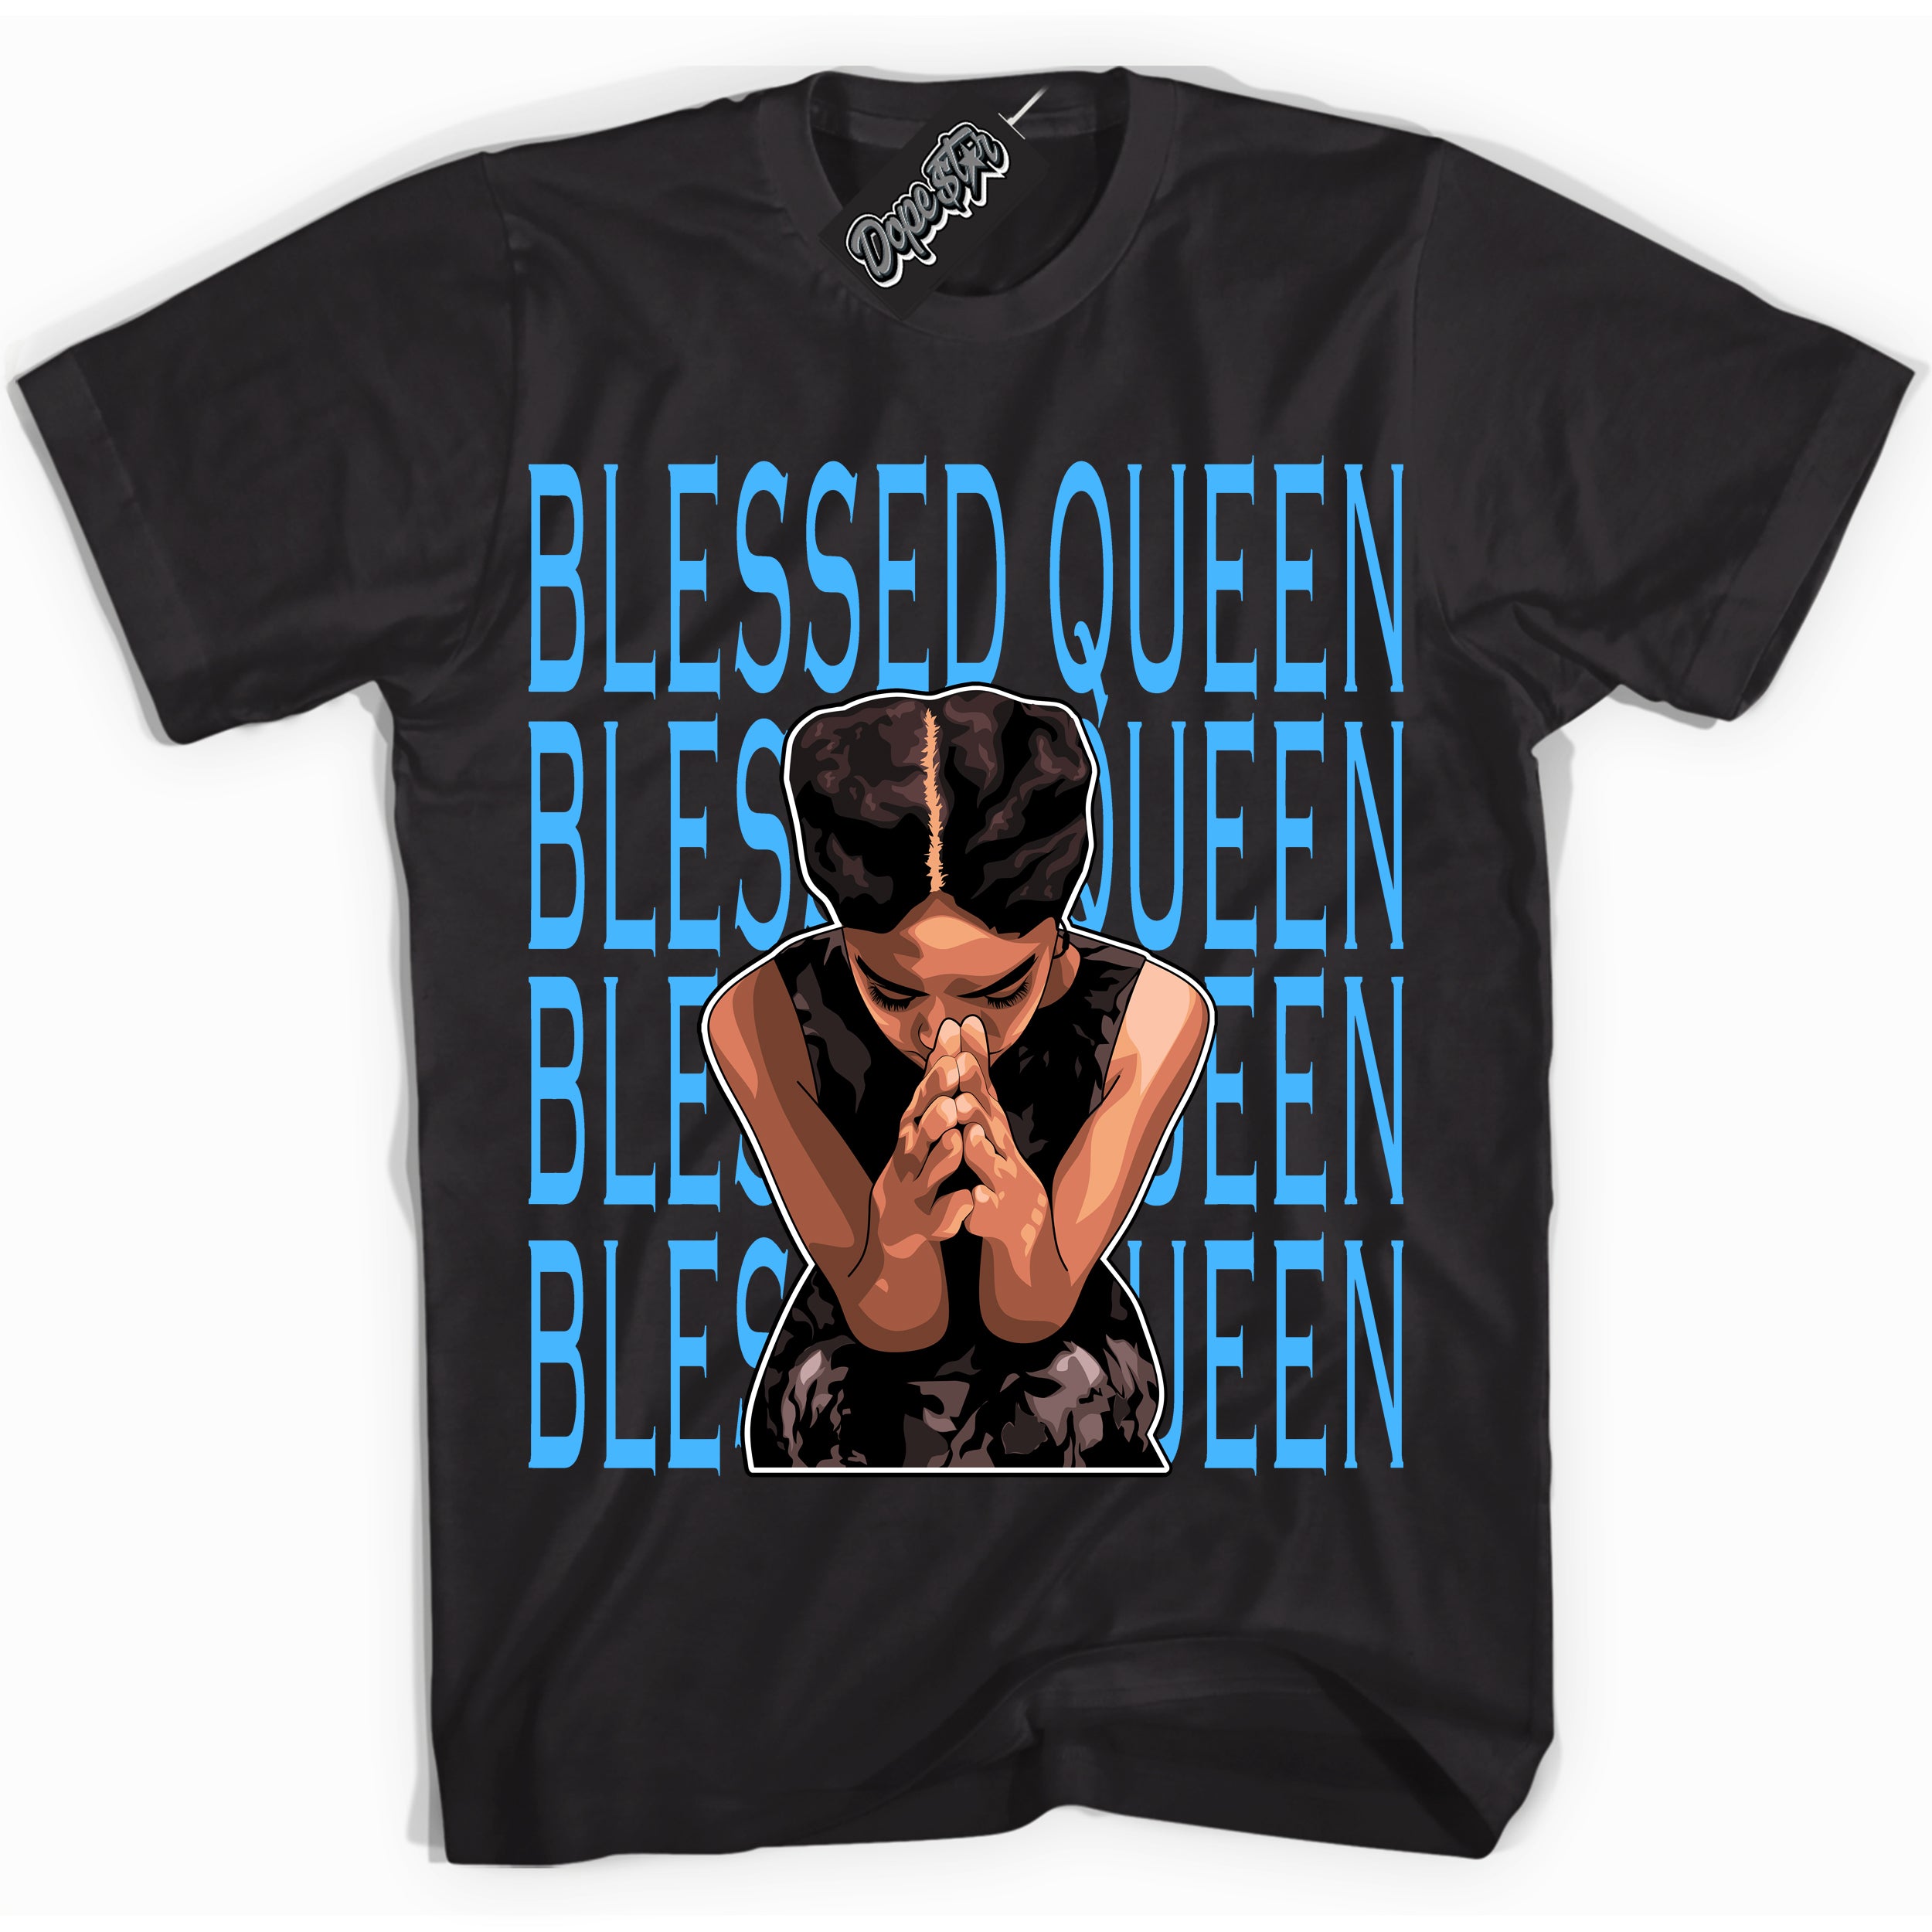 Cool Black graphic tee with “ Blessed Queen ” design, that perfectly matches Powder Blue 9s sneakers 